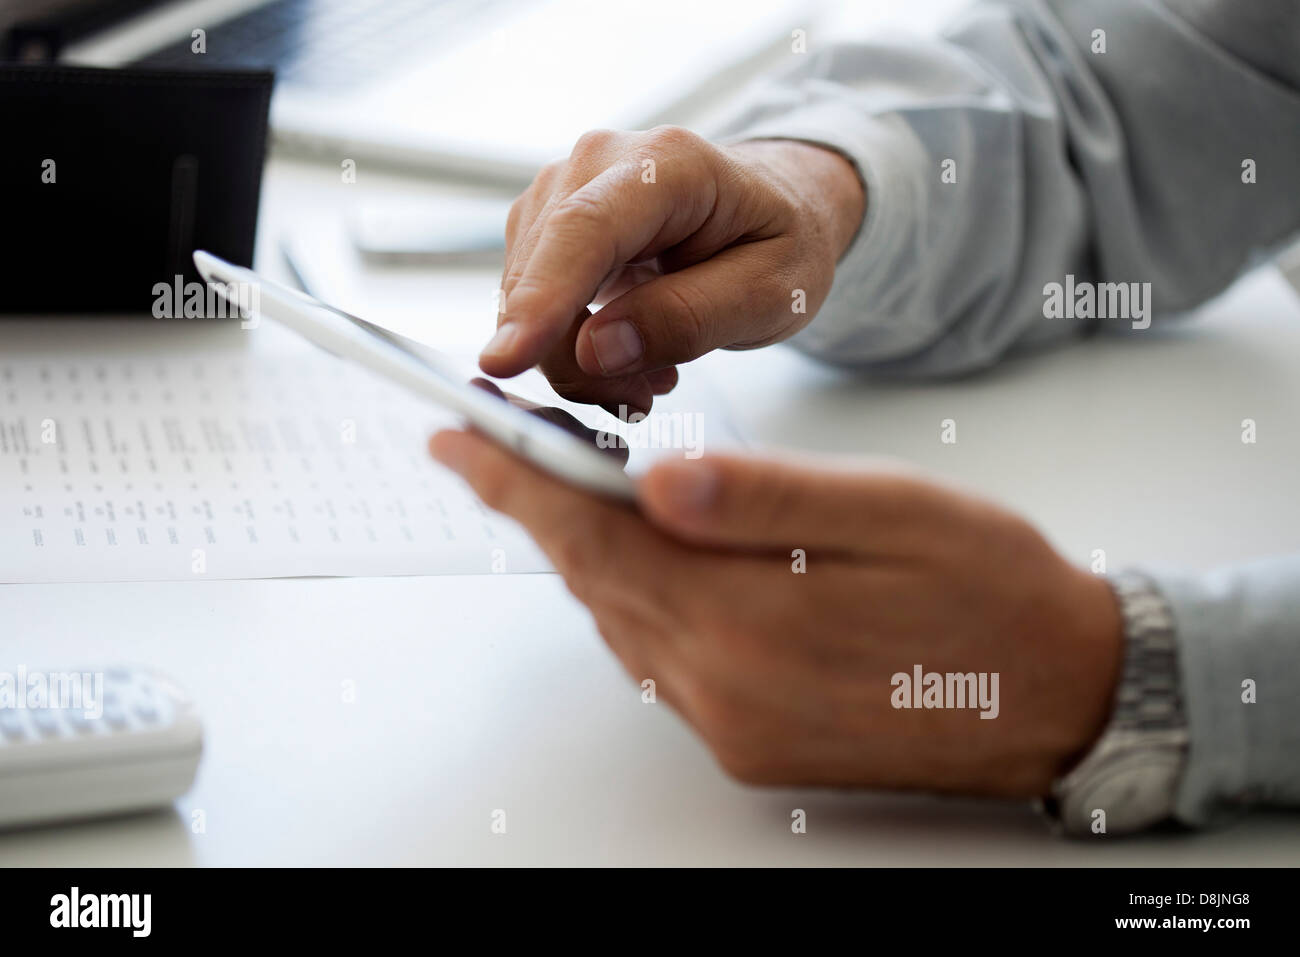 Man using touch screen on digital tablet, cropped Stock Photo